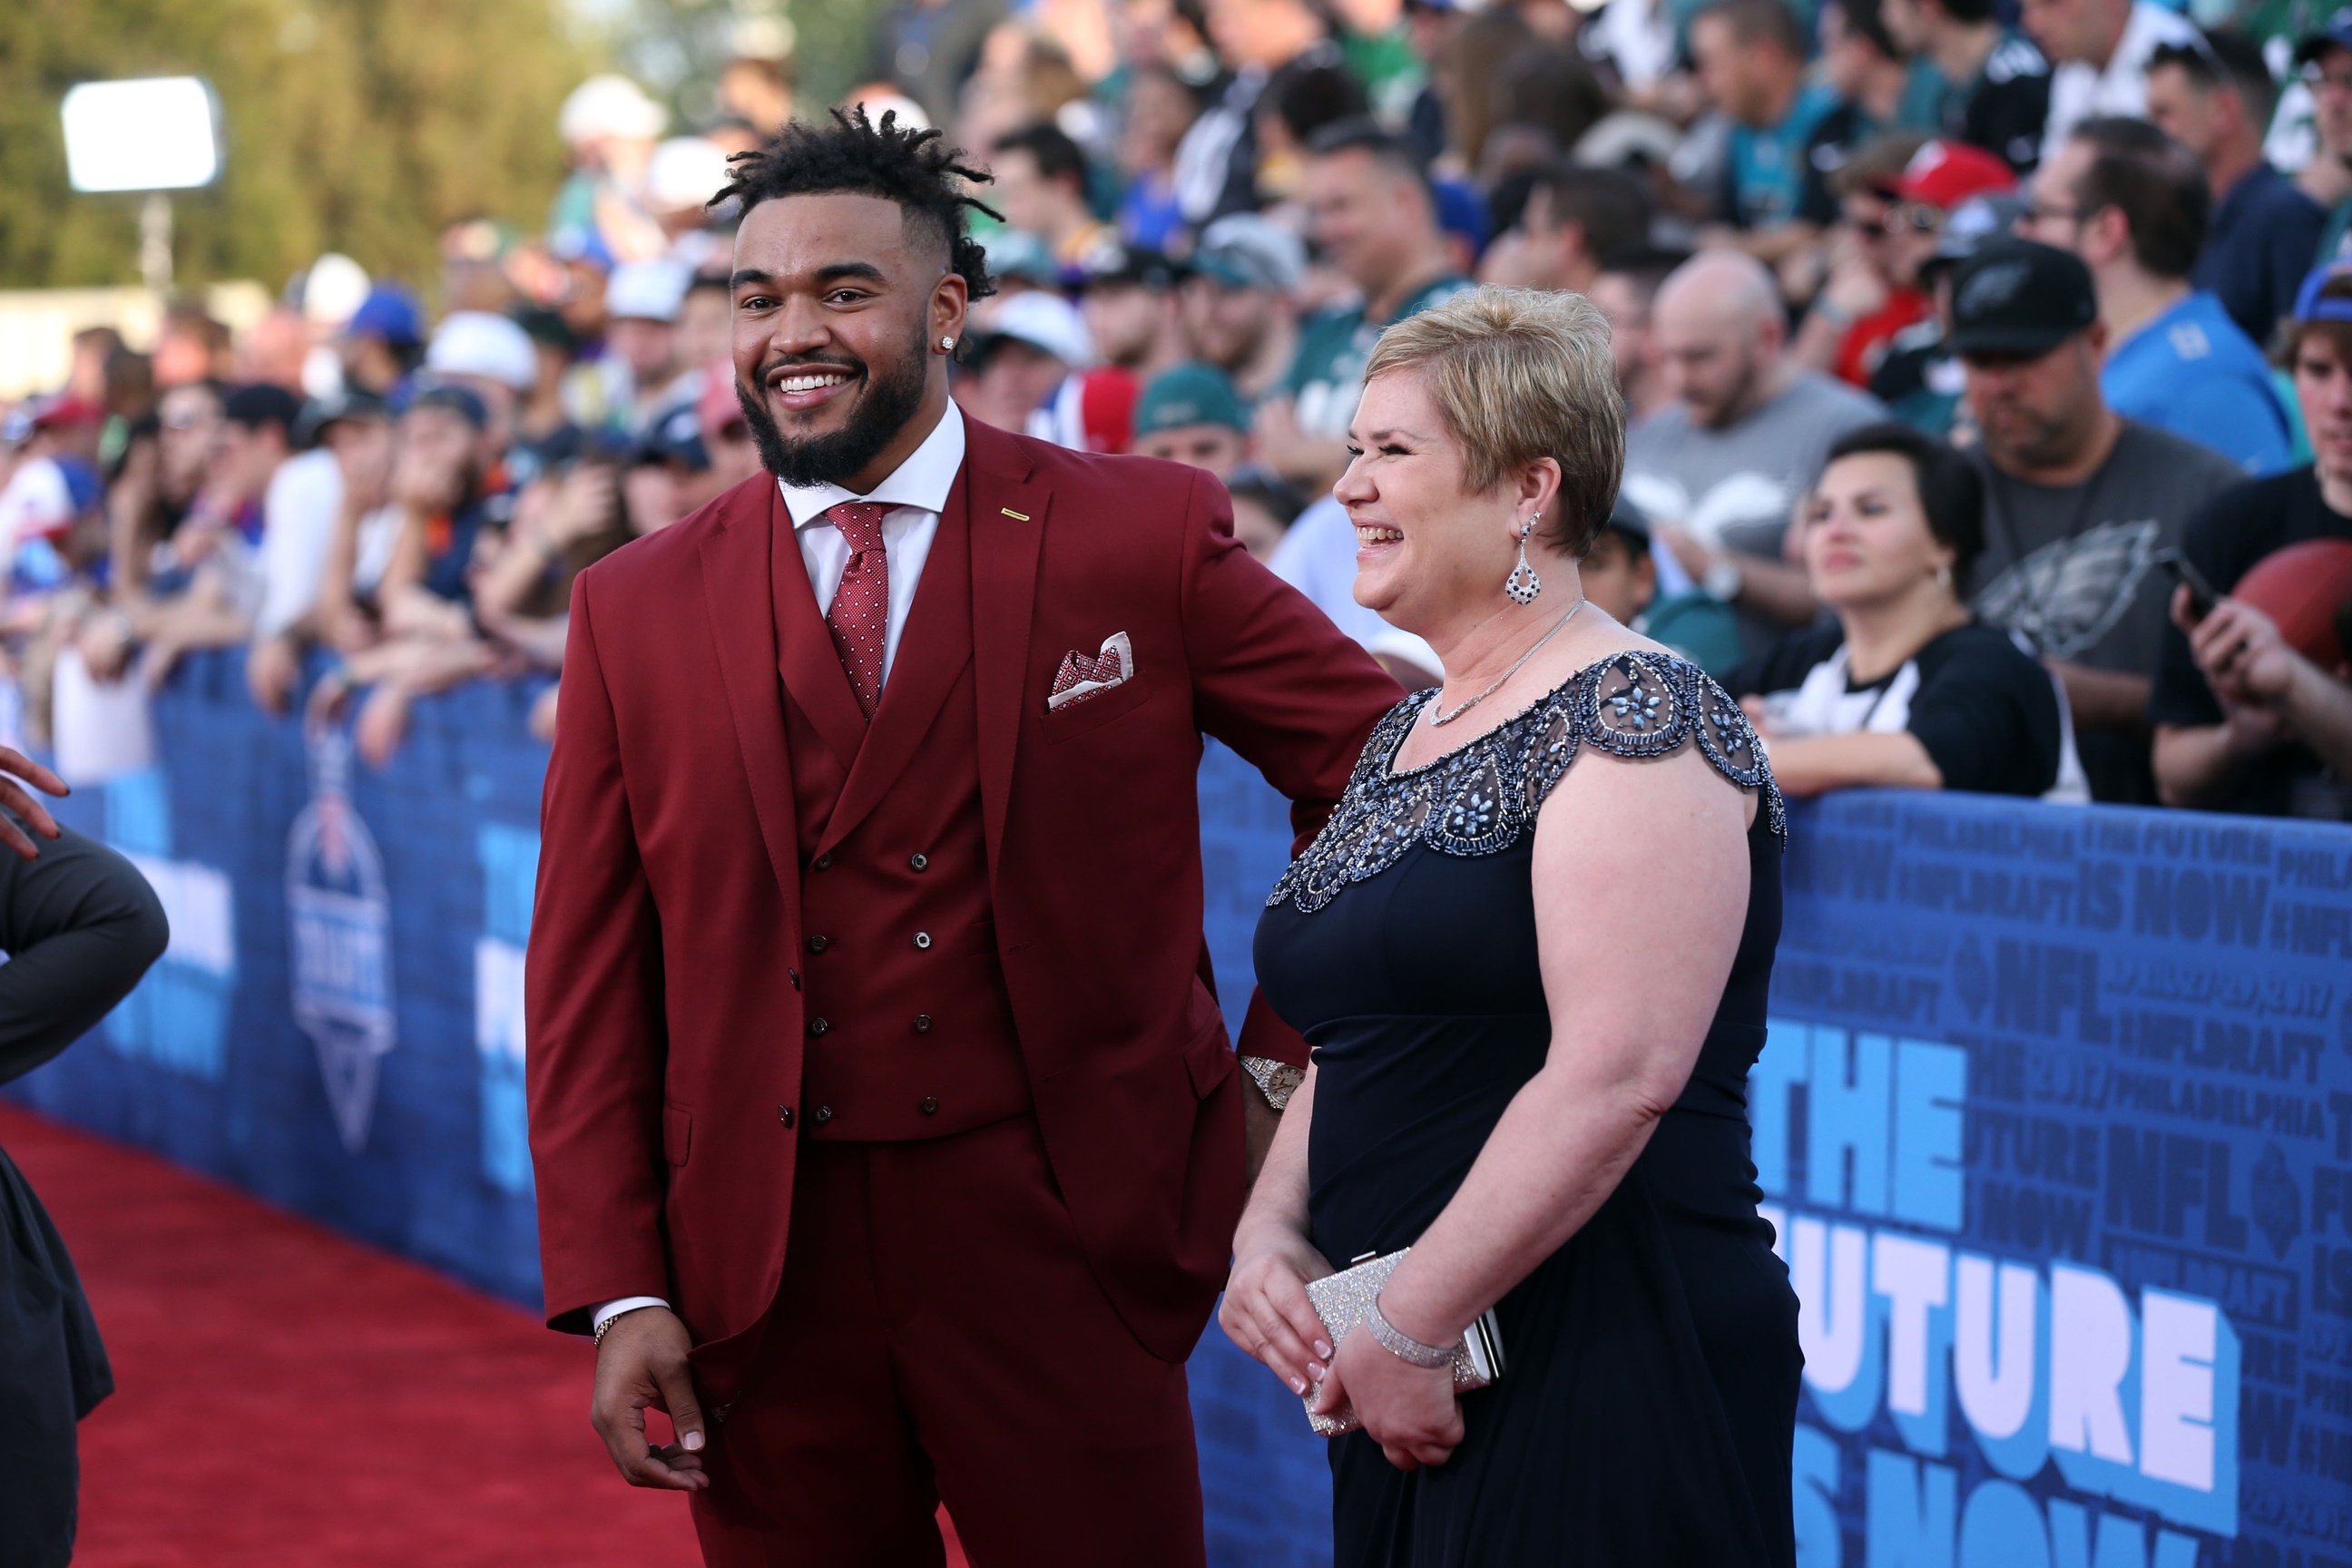 Apr 27, 2017; Philadelphia, PA, USA; Derek Barnett (Tennessee) poses for a photo with his mother Christine Barnett (right) on the red carpet before the start of the NFL Draft at Philadelphia Museum of Art. Mandatory Credit: Bill Streicher-USA TODAY Sports